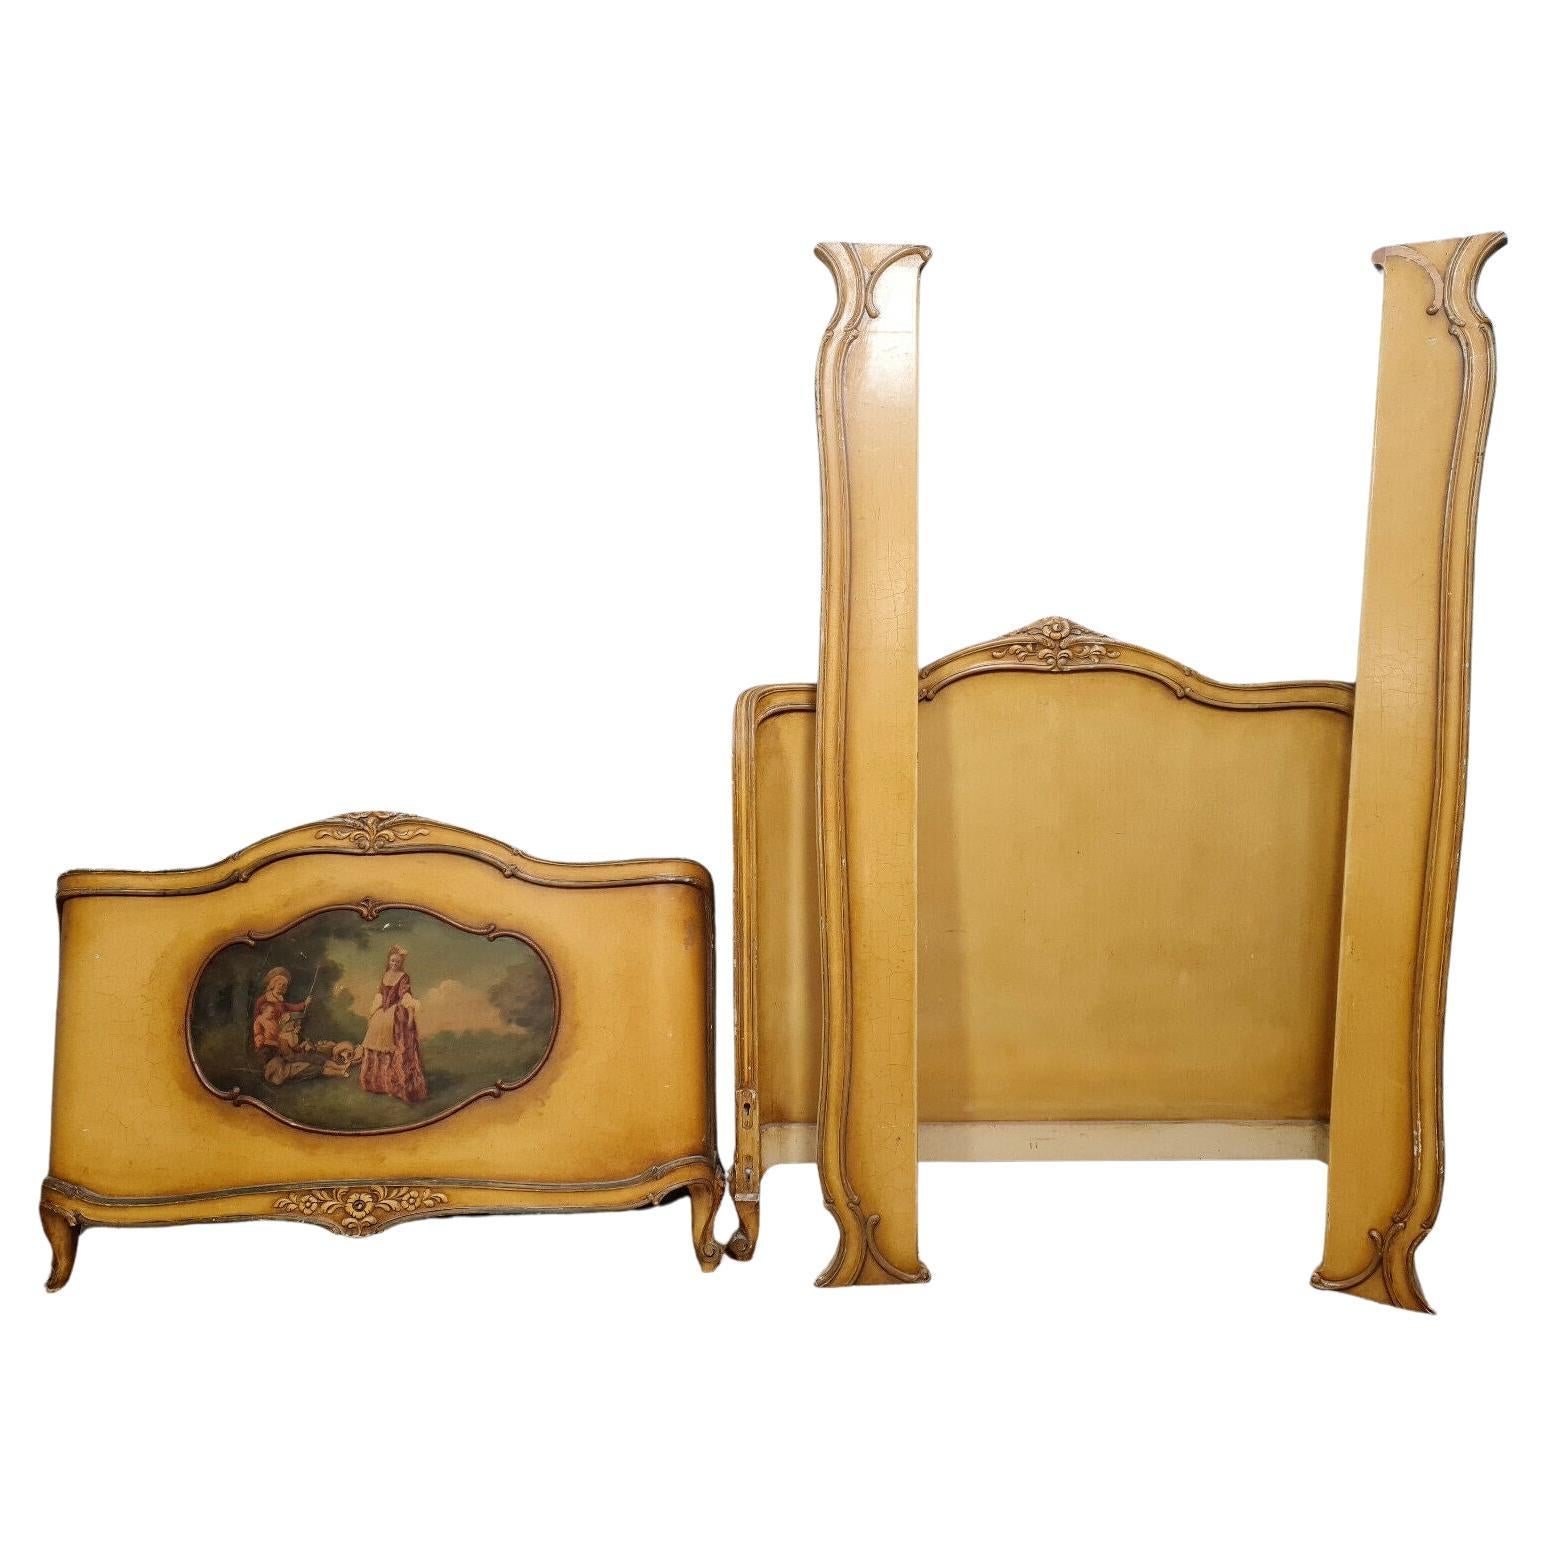 Exquisite Louis XV Style Canopy Bed in Lacquered and Painted Wood -1X26 For Sale